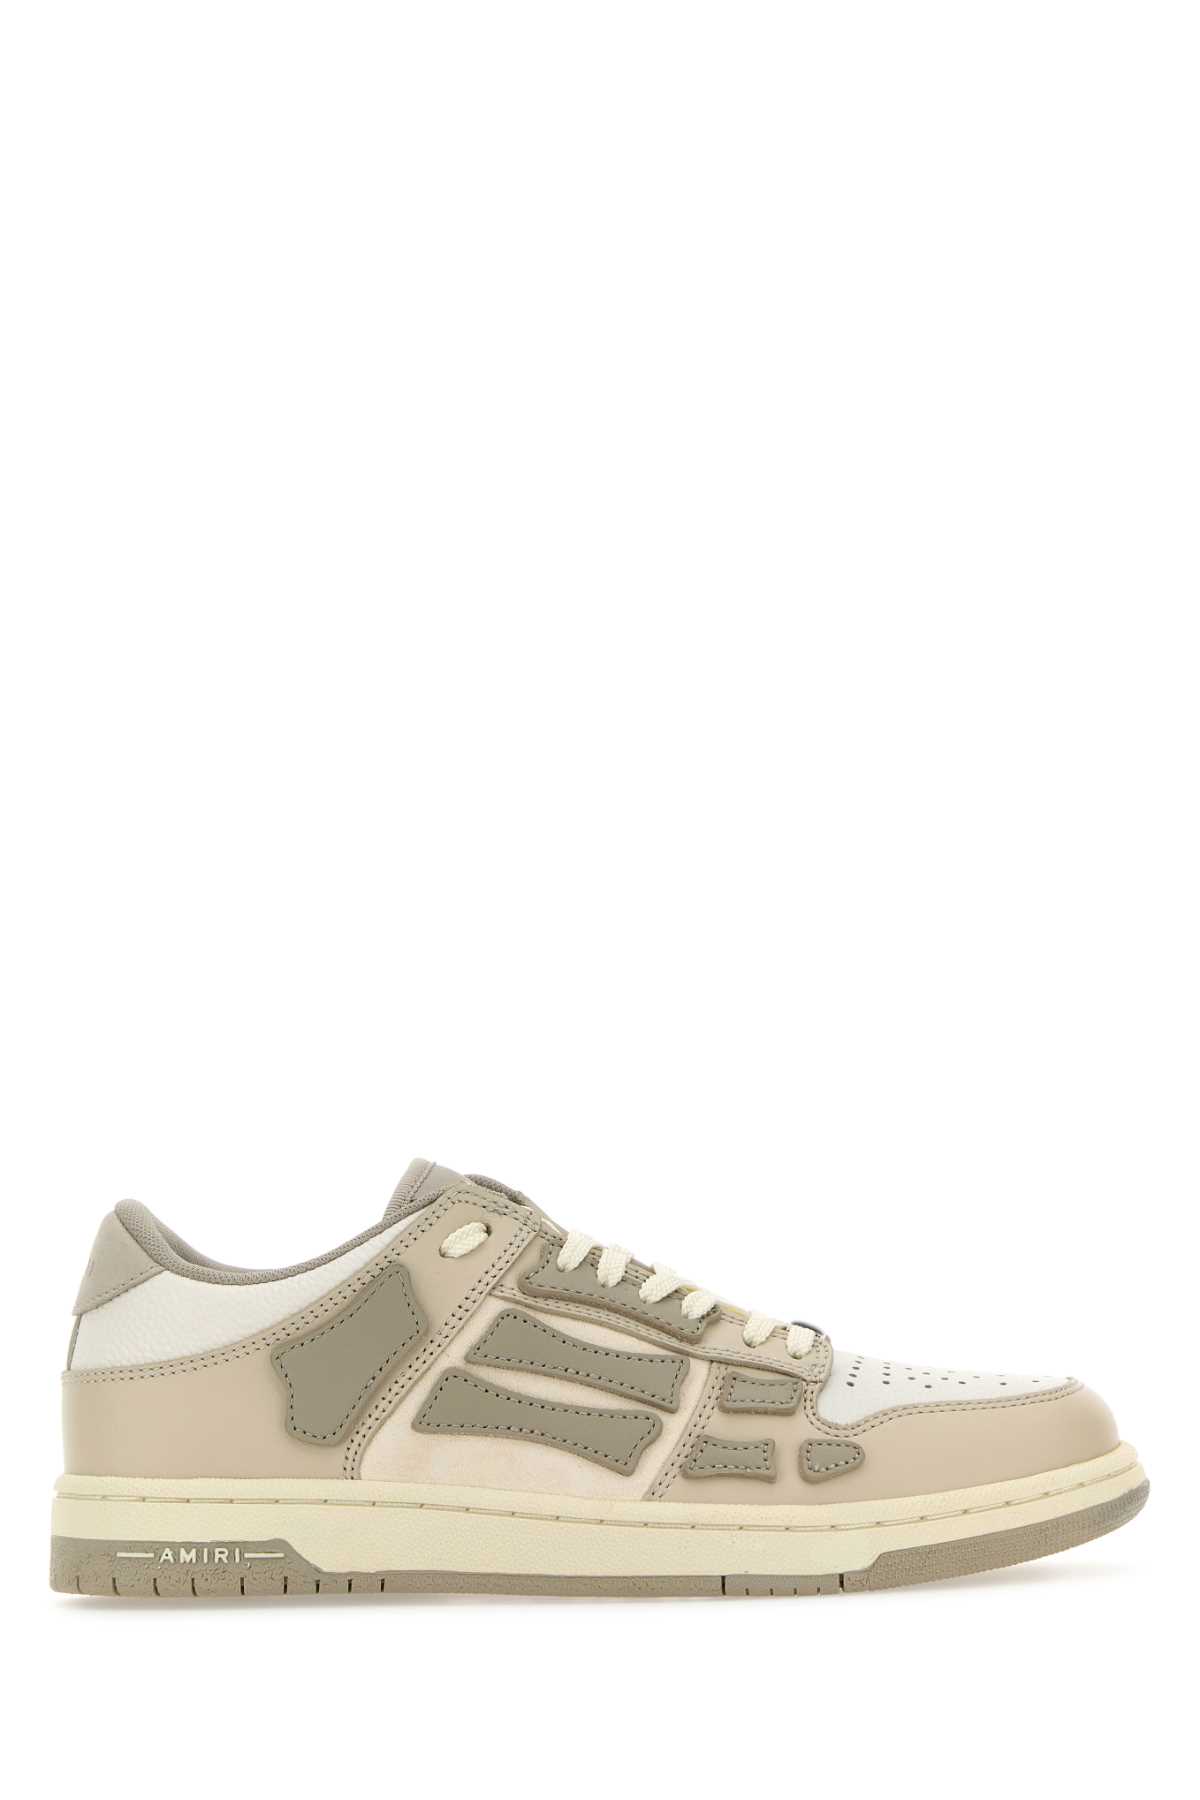 Amiri Multicolor Leather Skel Trainers In Neutral